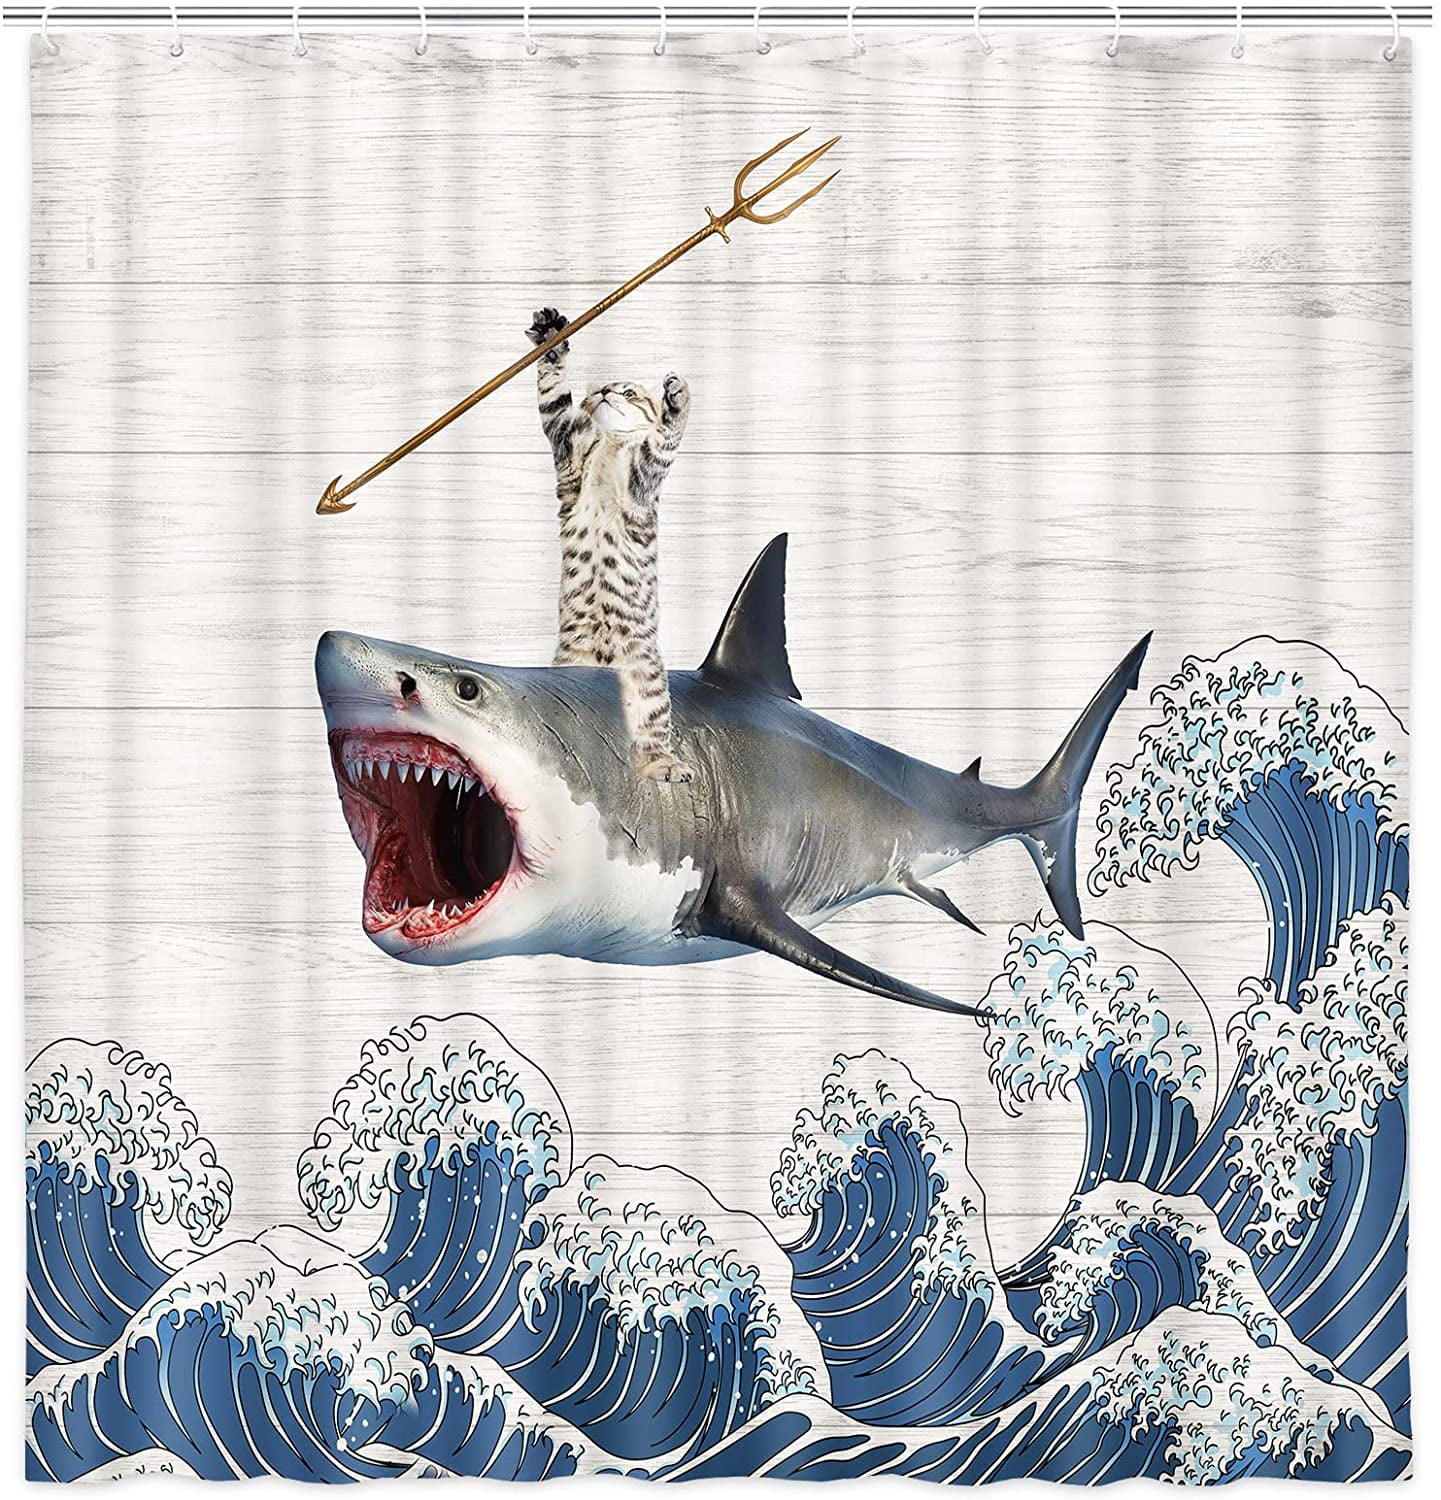 Funny Cat Shark Fabric Shower Curtain Cute Riding Great White For Bathroom Anese Sea Ocean Wave With Hooks 69 X 70 Inch Com